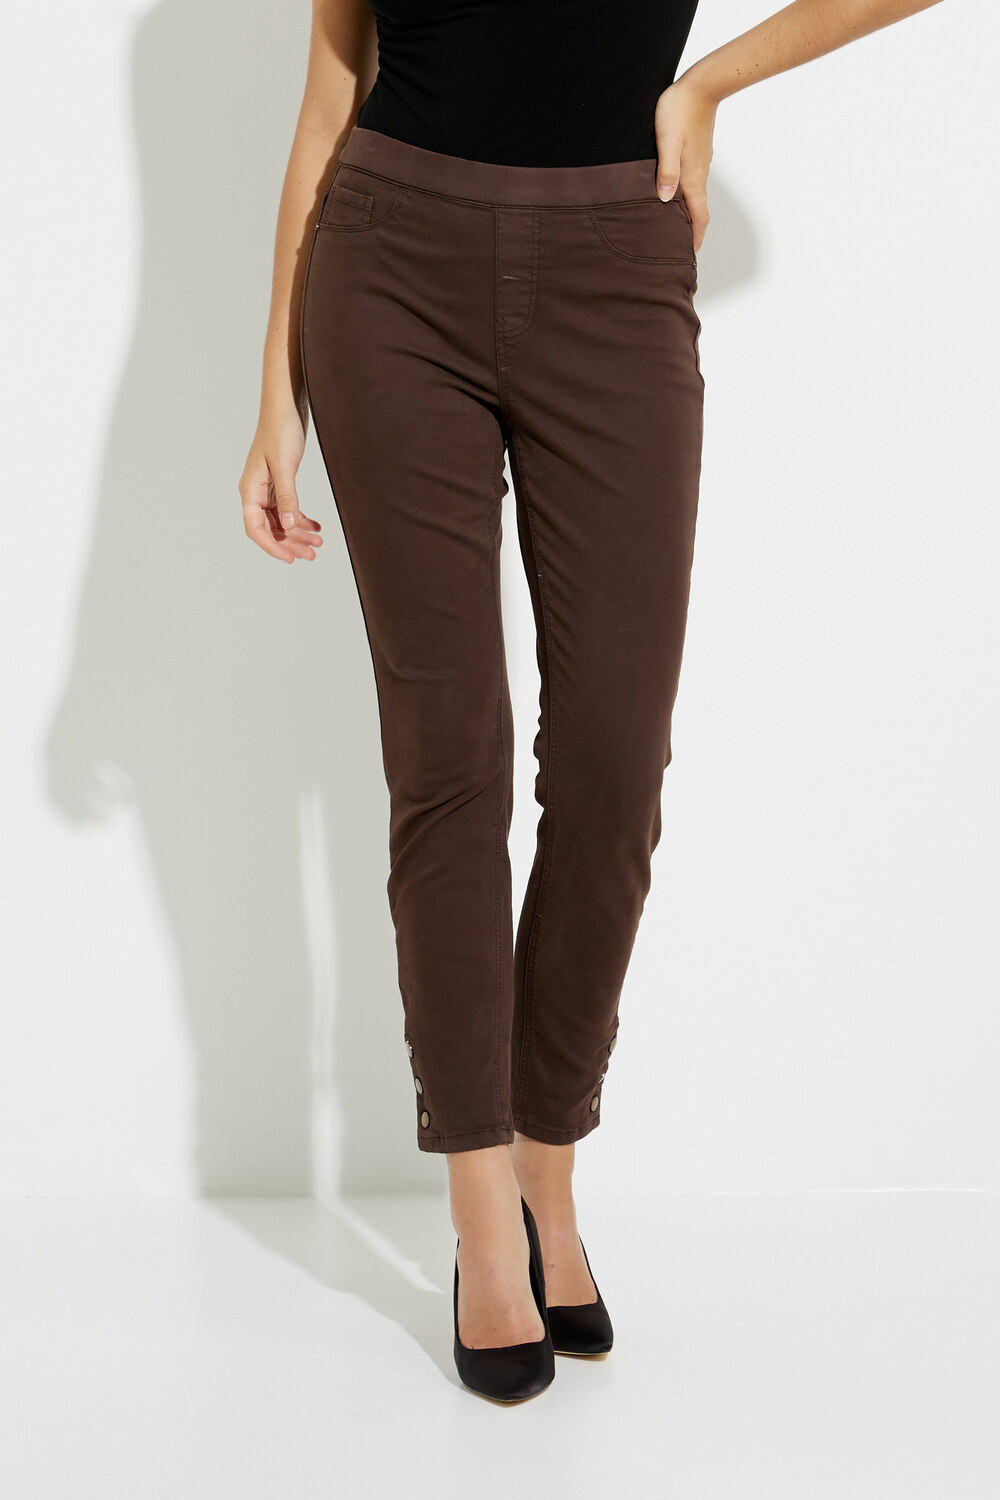 Twill Pants with Snap Button Hem Style C5302R. Coffee